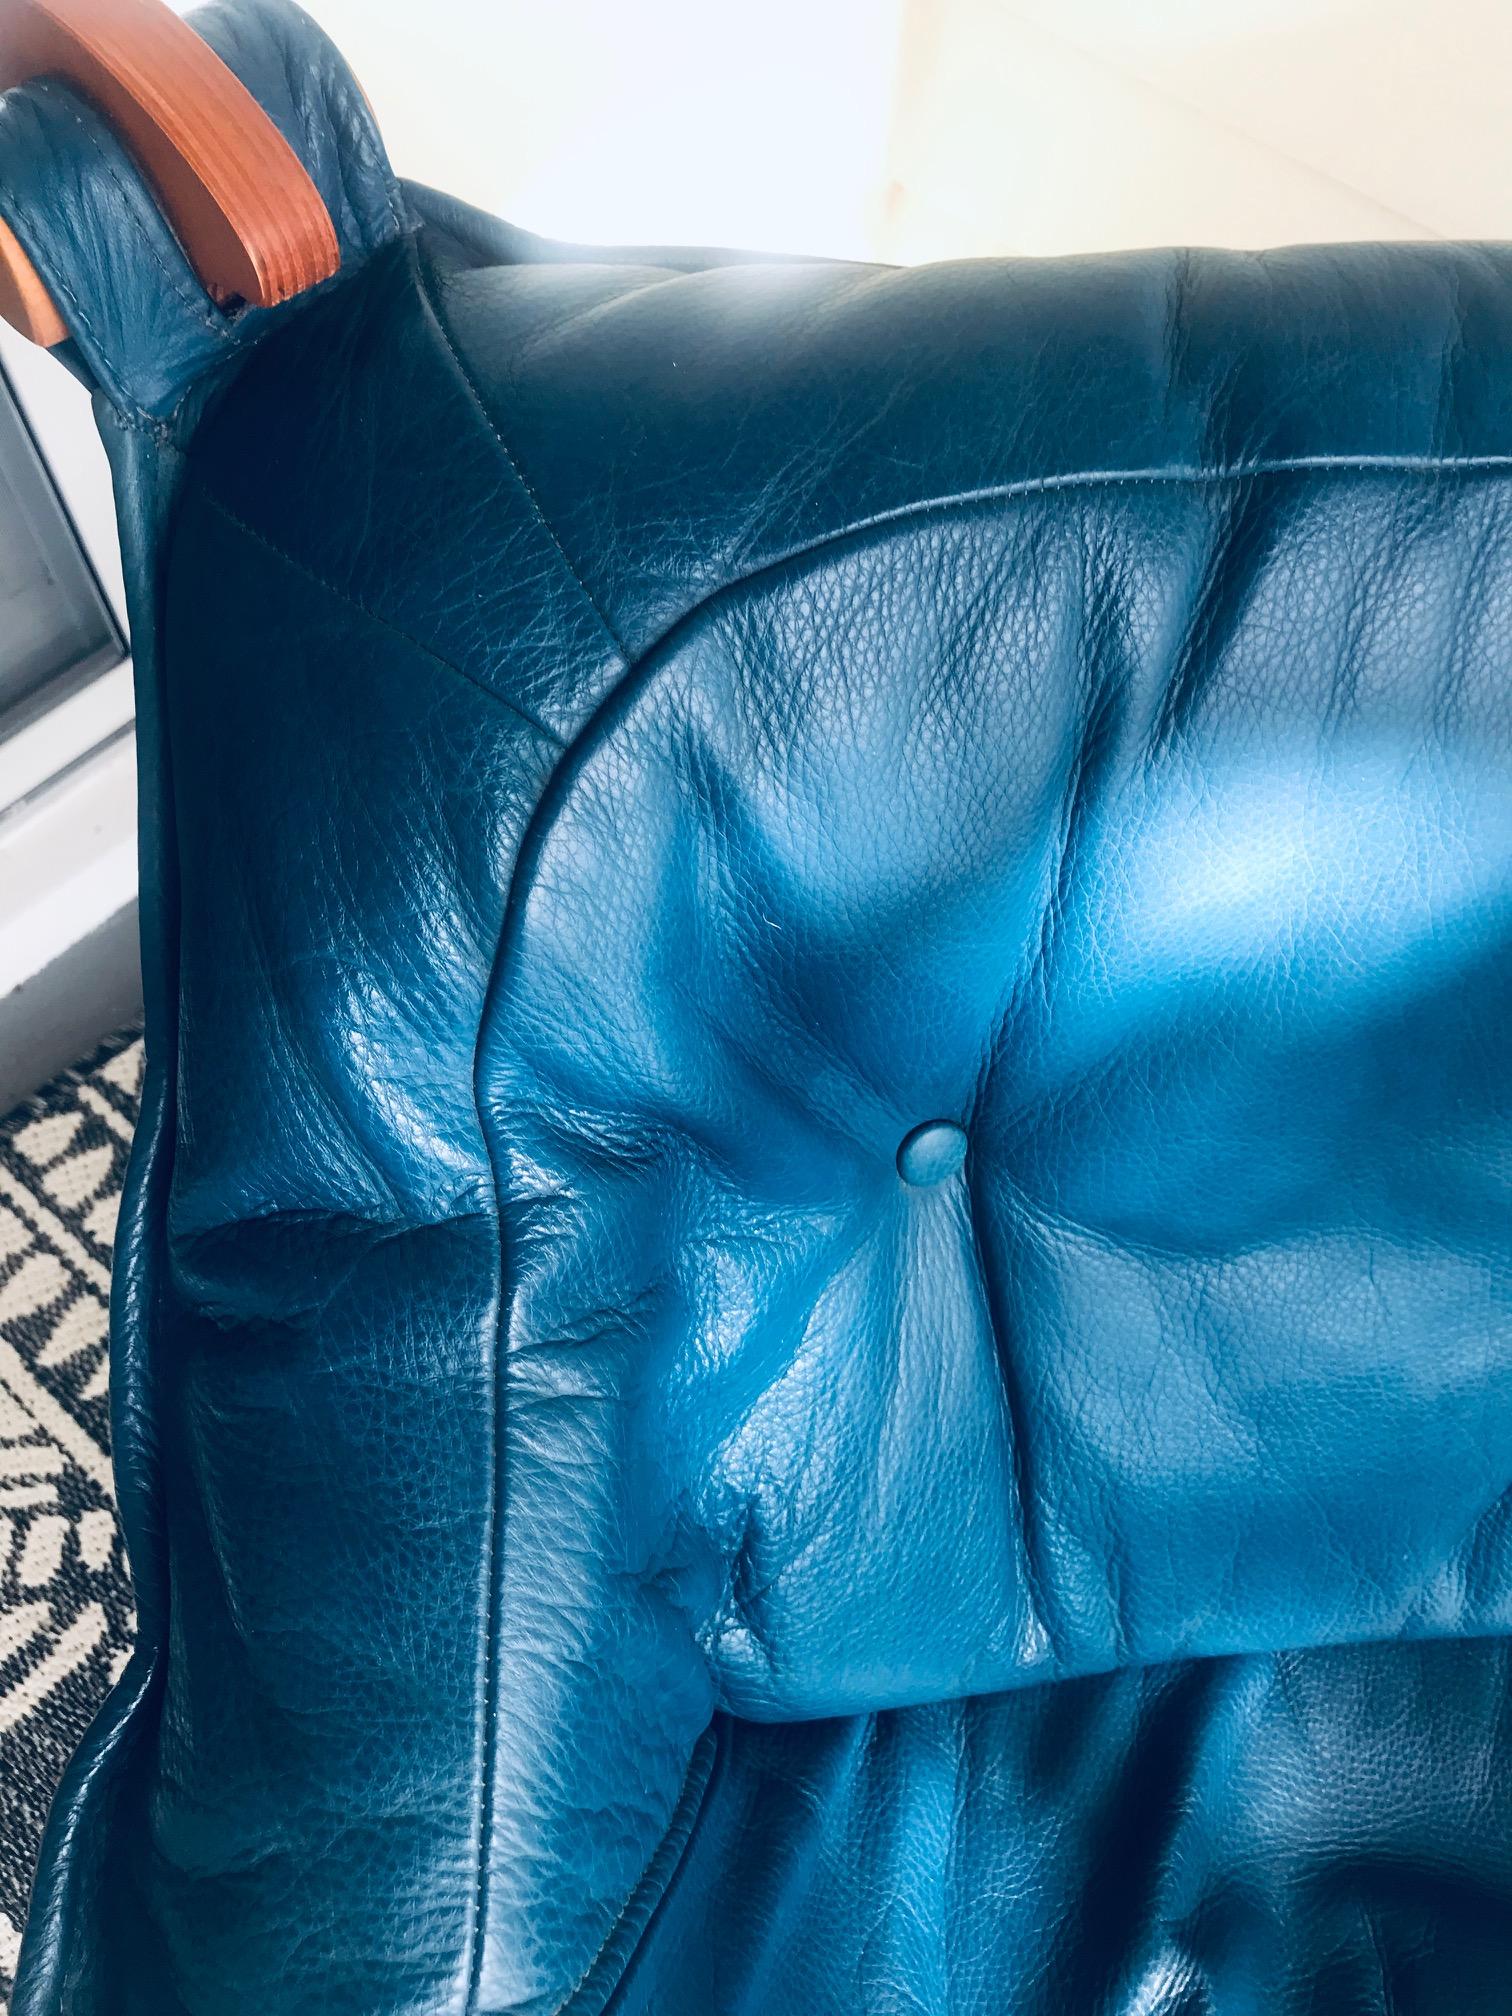 1970s Luna Lounge Chair by Odd Knutsen in Cadet Blue Leather, Norway 2